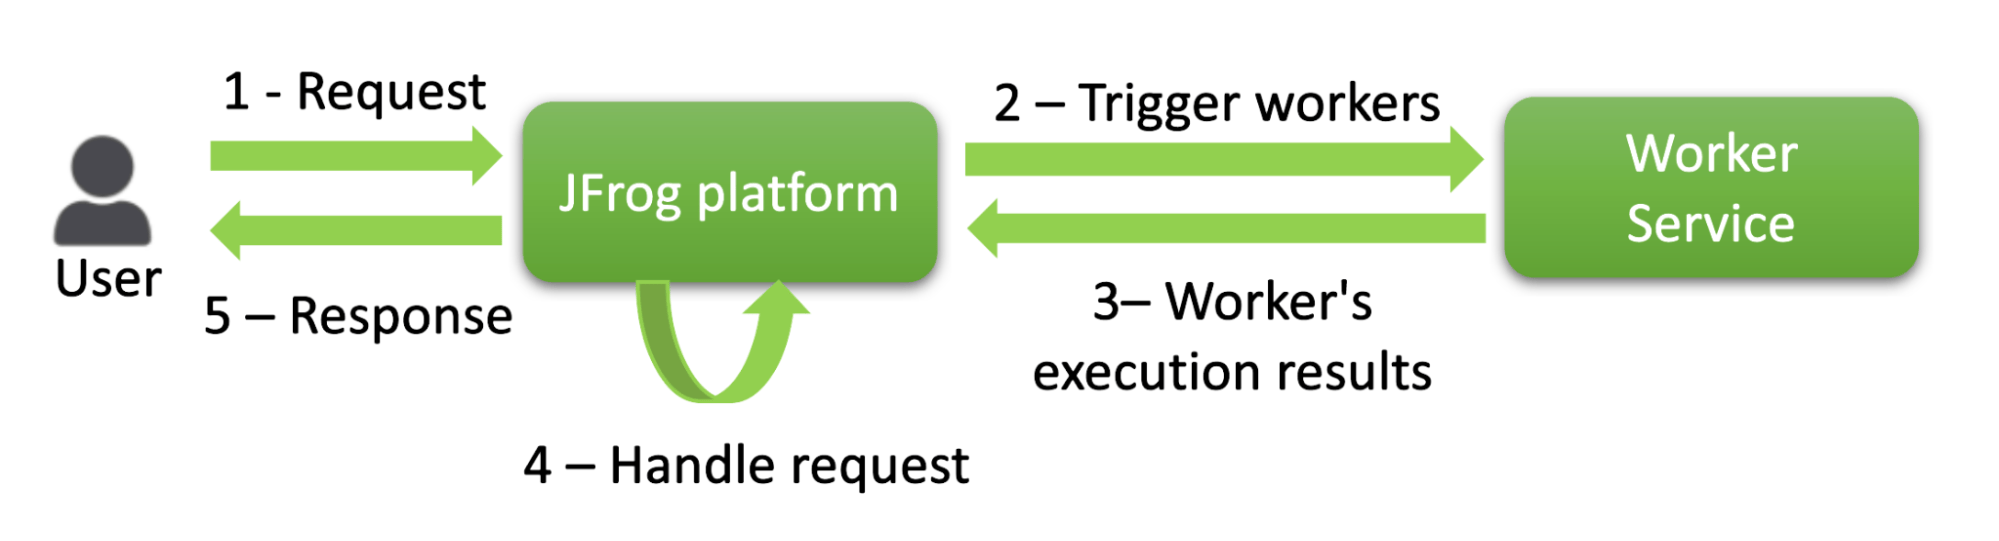 Figure 3 - Workflow of a worker service